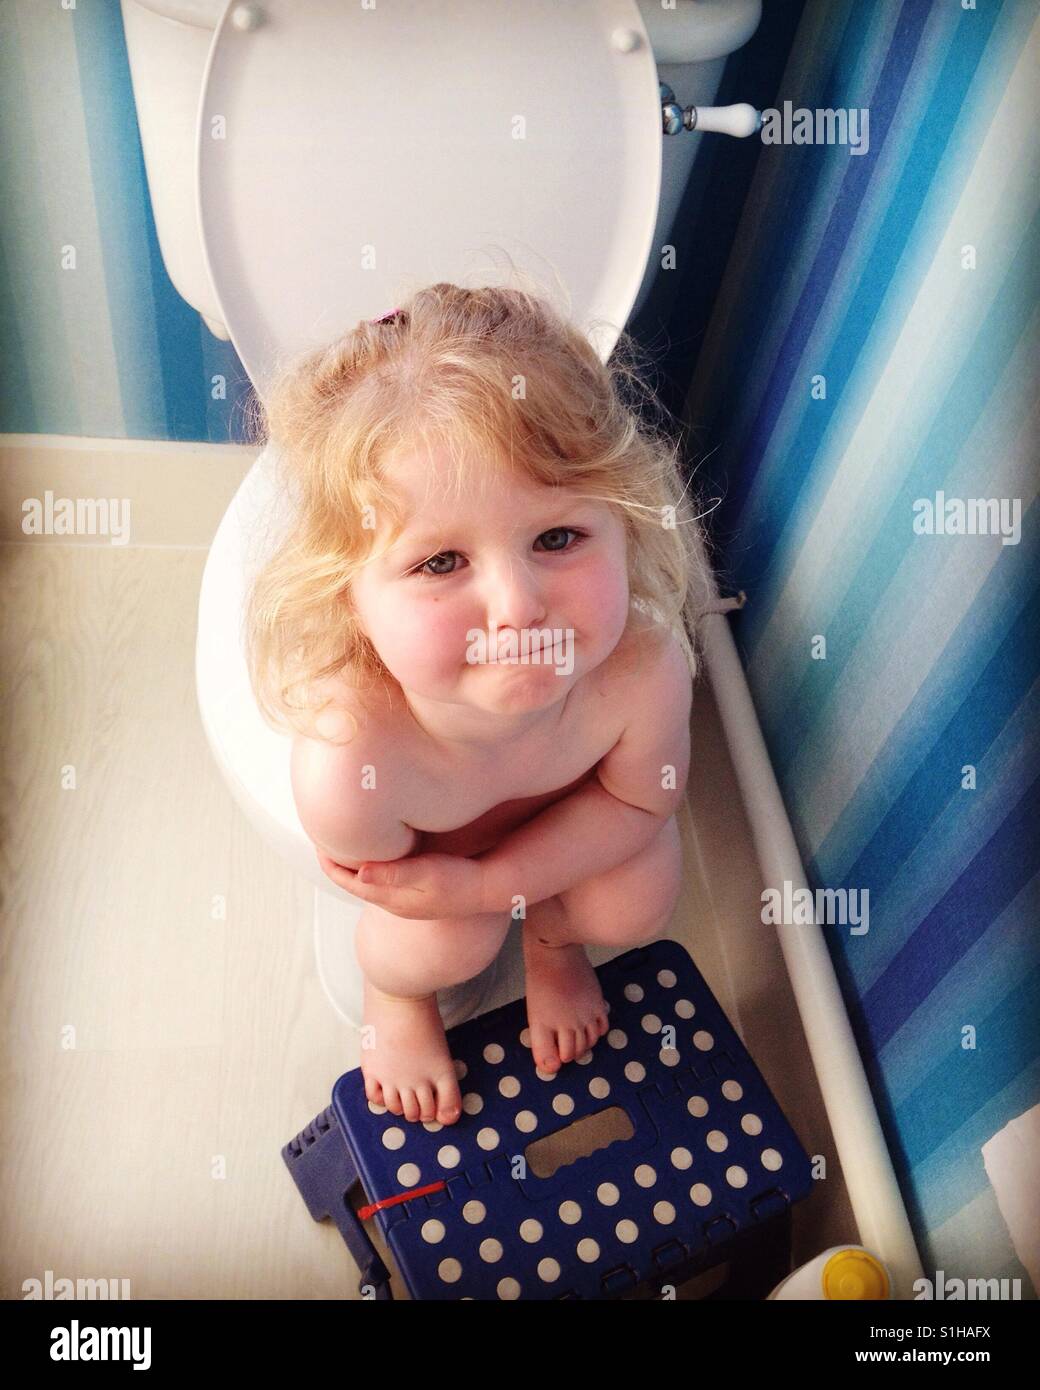 Toddler child kid goes to the toilet as part of toilet training. Stock Photo